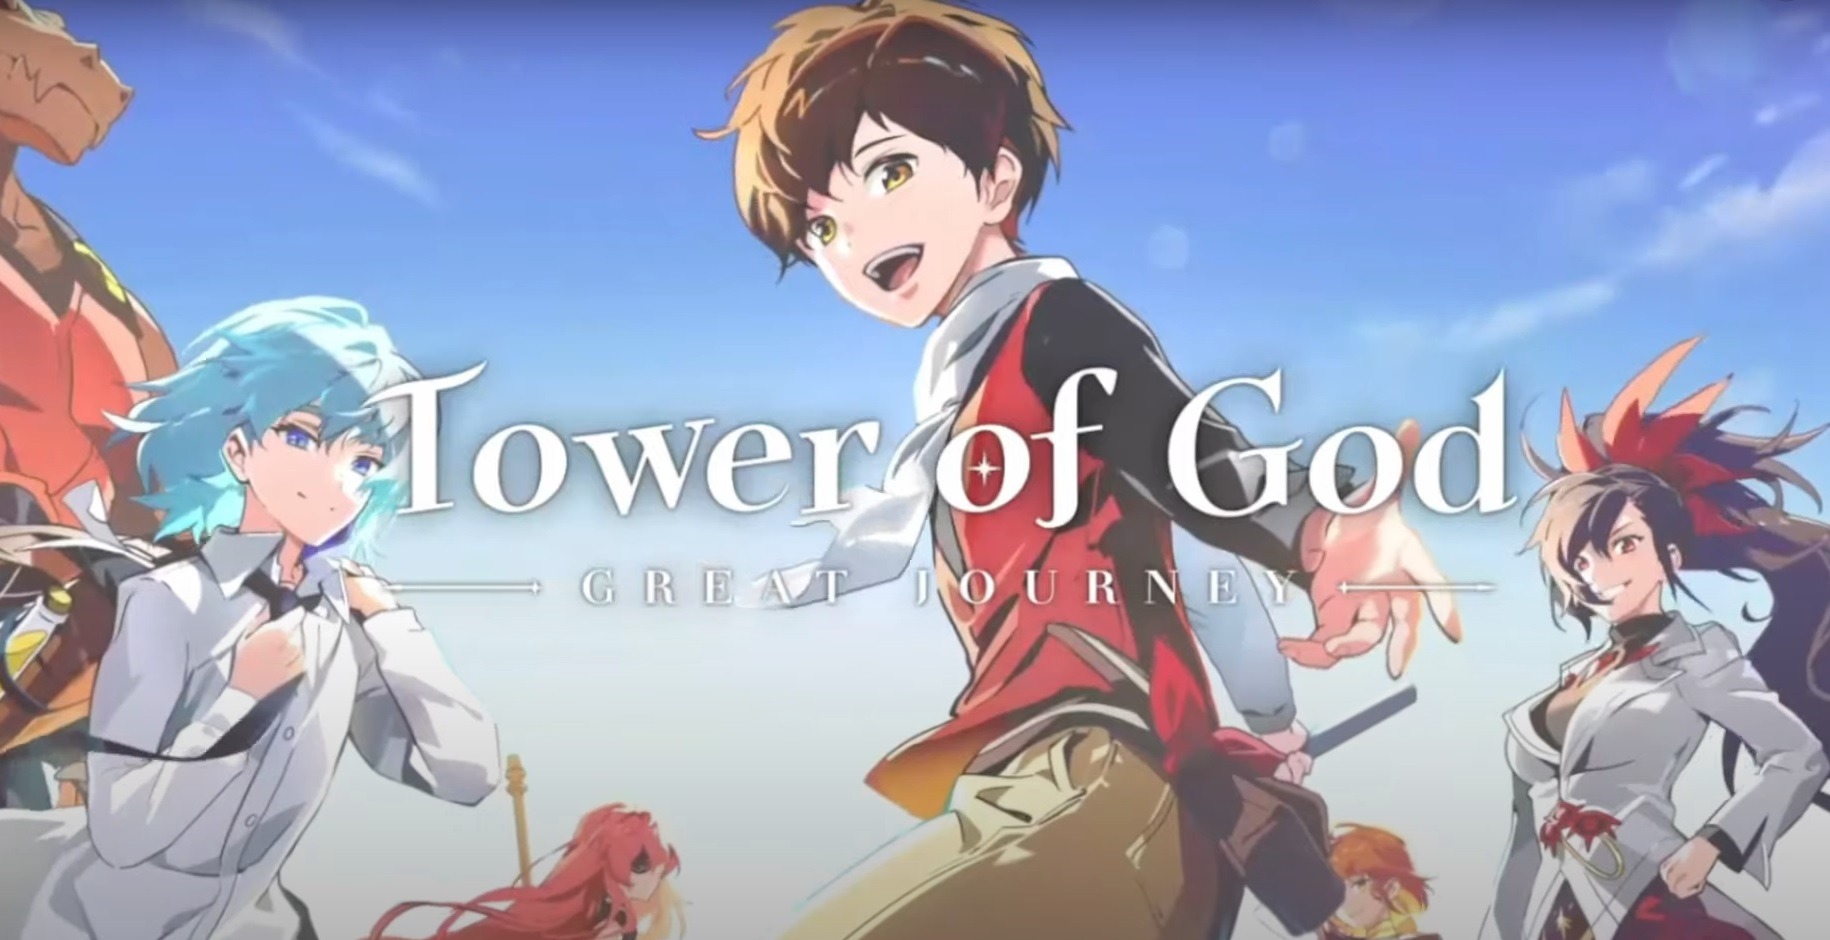 Tower of God: Great Journey Anime Mobile Game